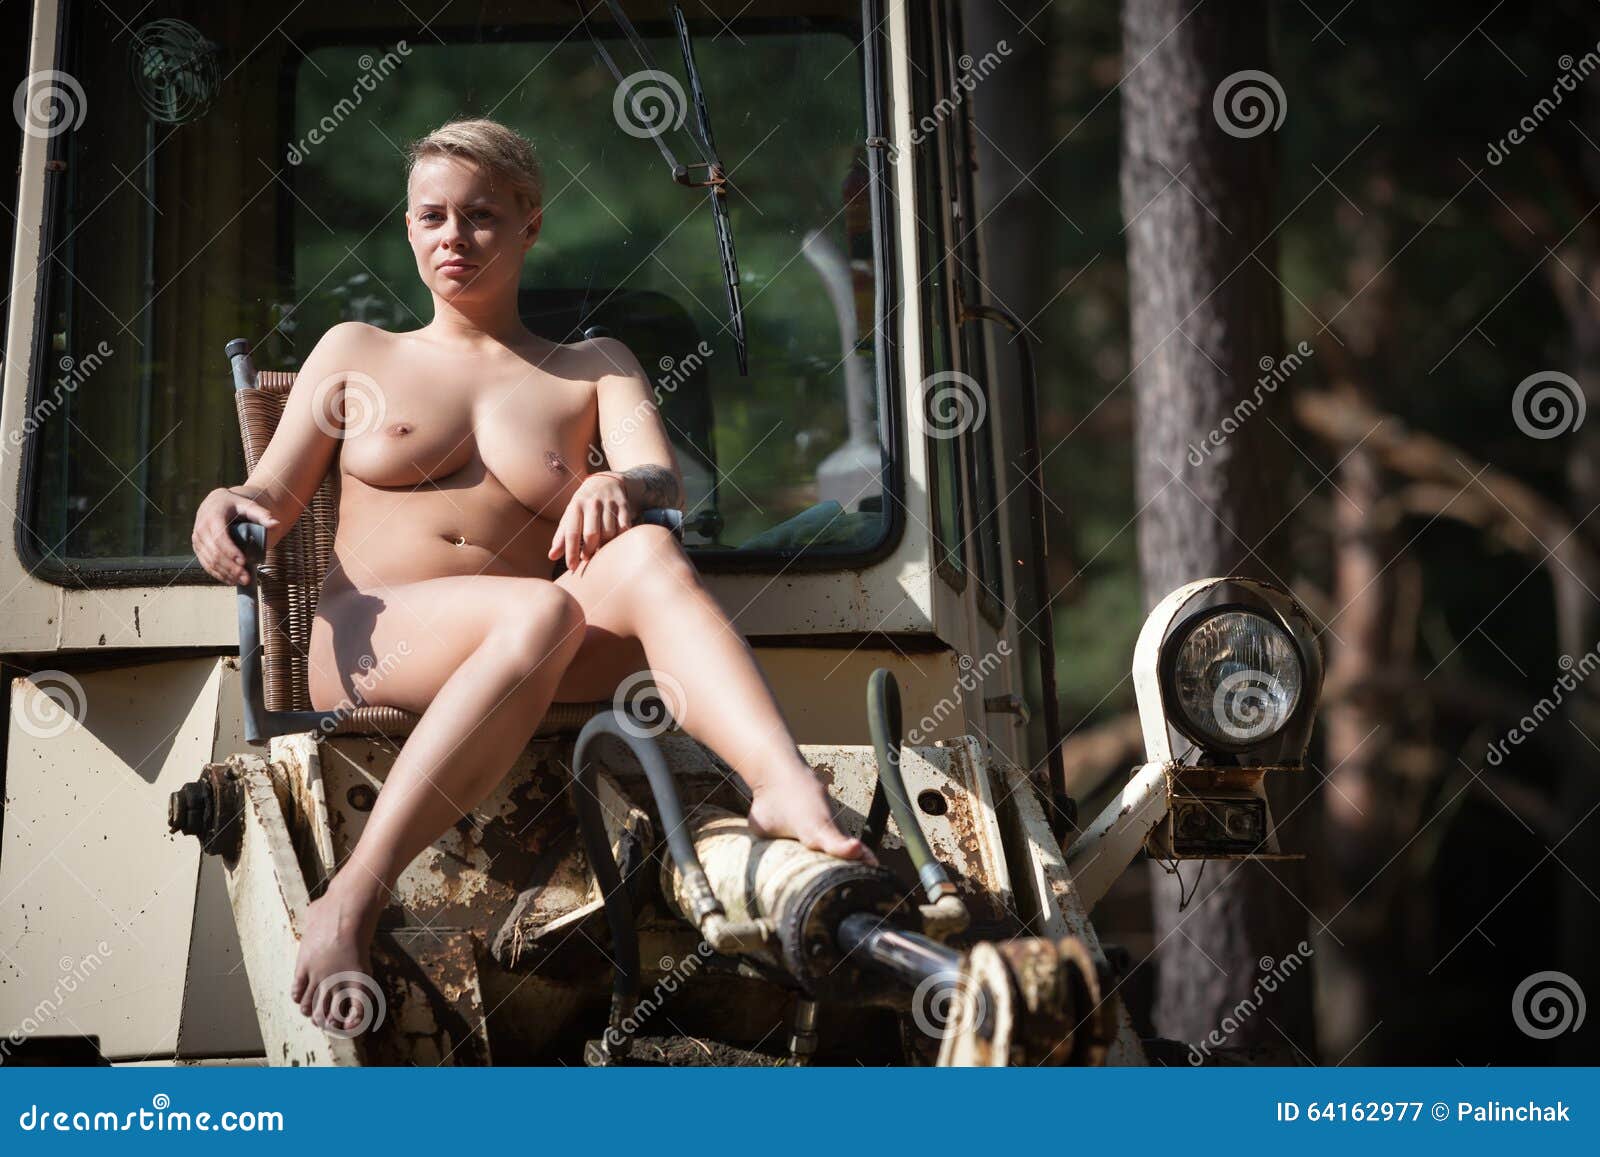 casper steenkamp recommends naked girls on tractors pic